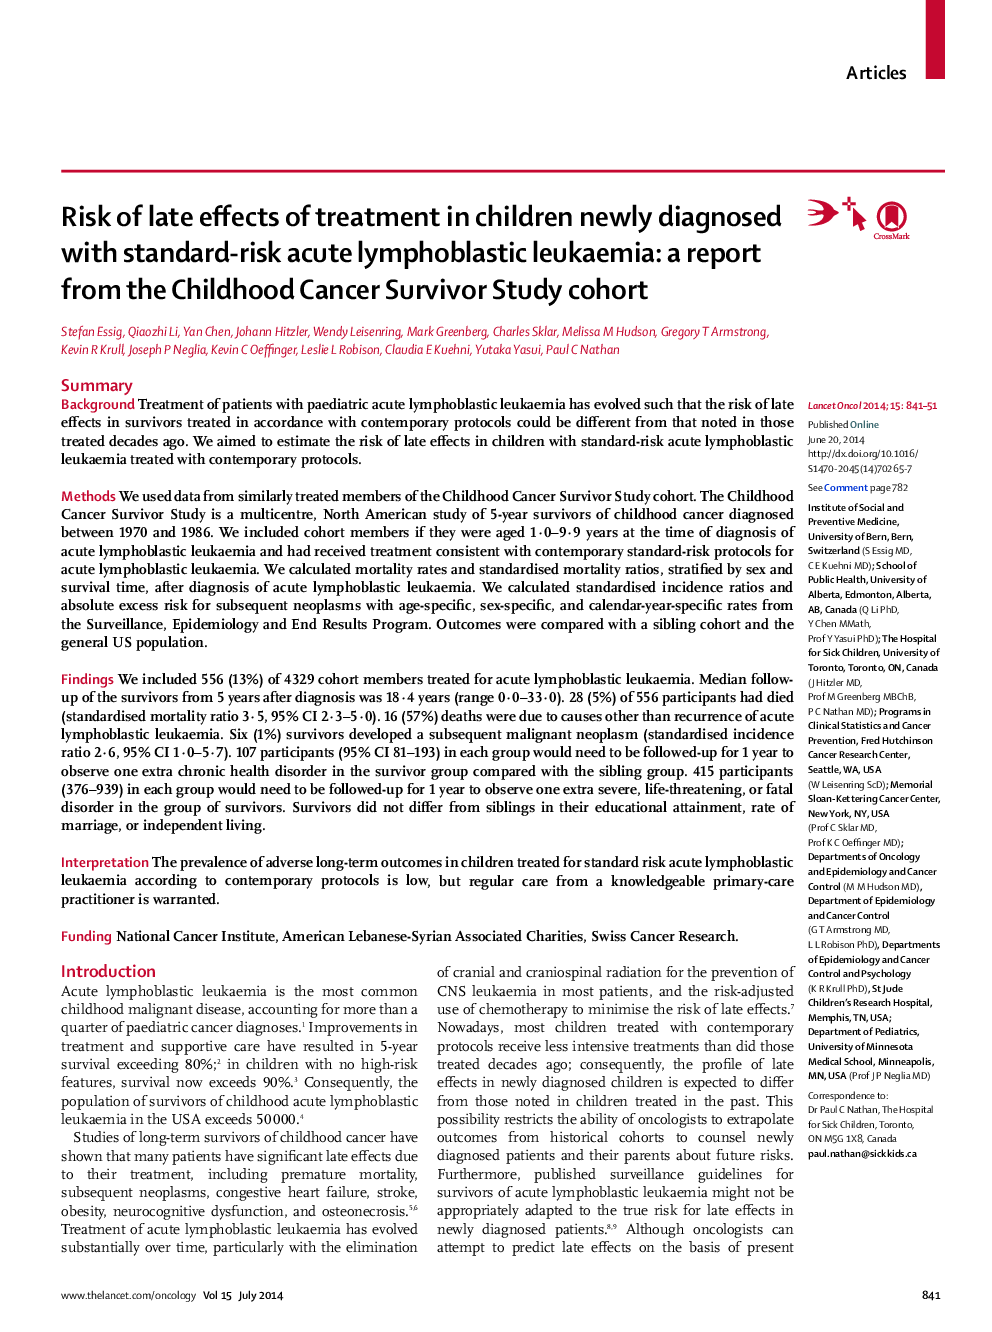 Risk of late effects of treatment in children newly diagnosed with standard-risk acute lymphoblastic leukaemia: a report from the Childhood Cancer Survivor Study cohort